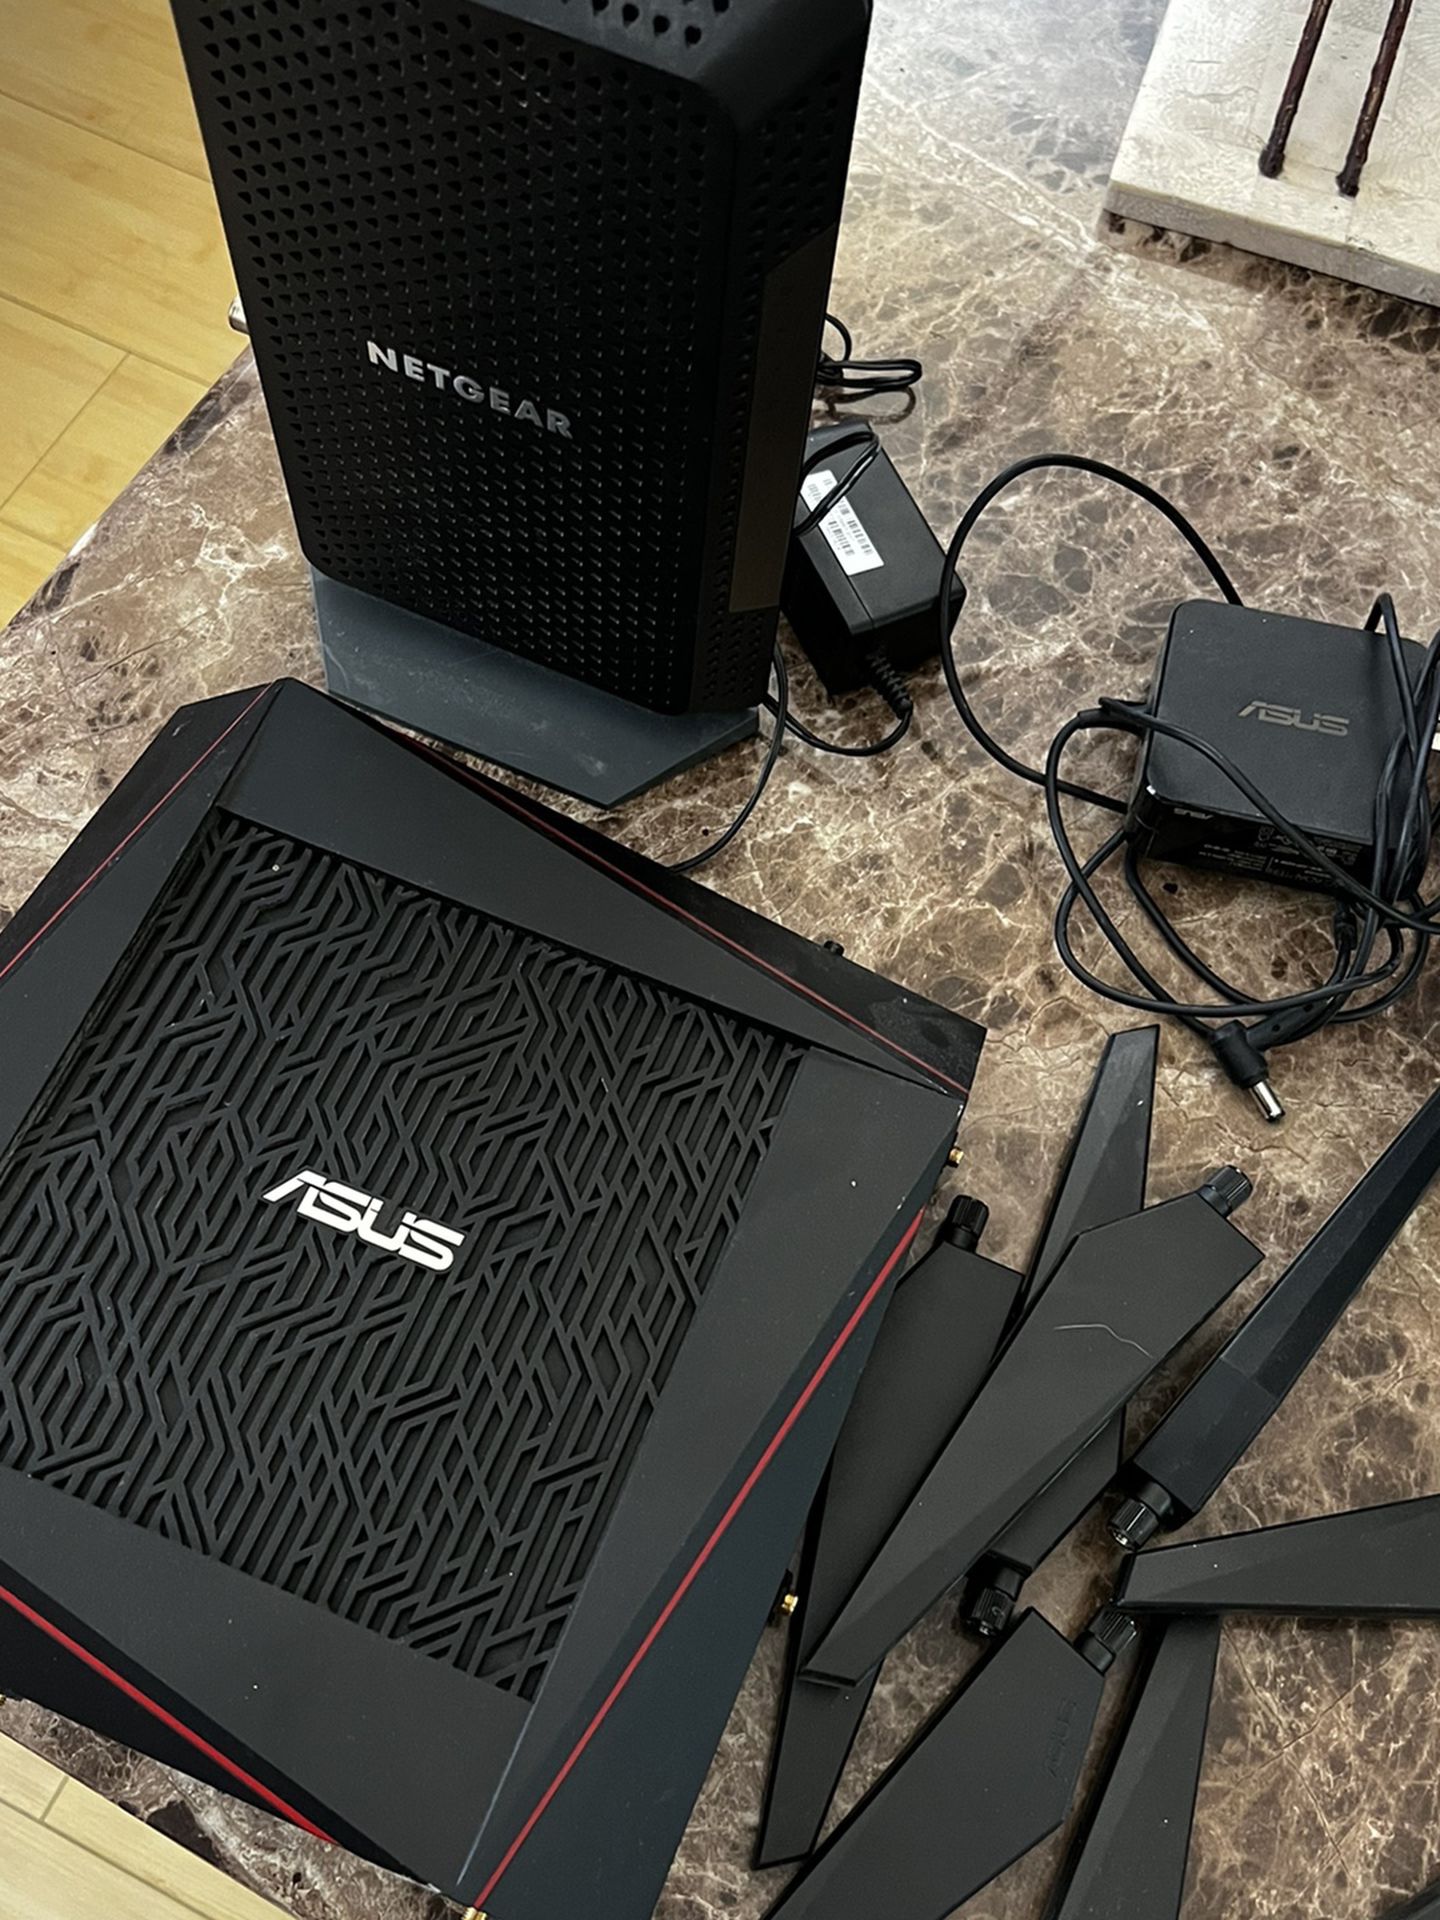 ASUS ROUTER(RT-AC5300) And NETGEAR MODEM(CM1200)